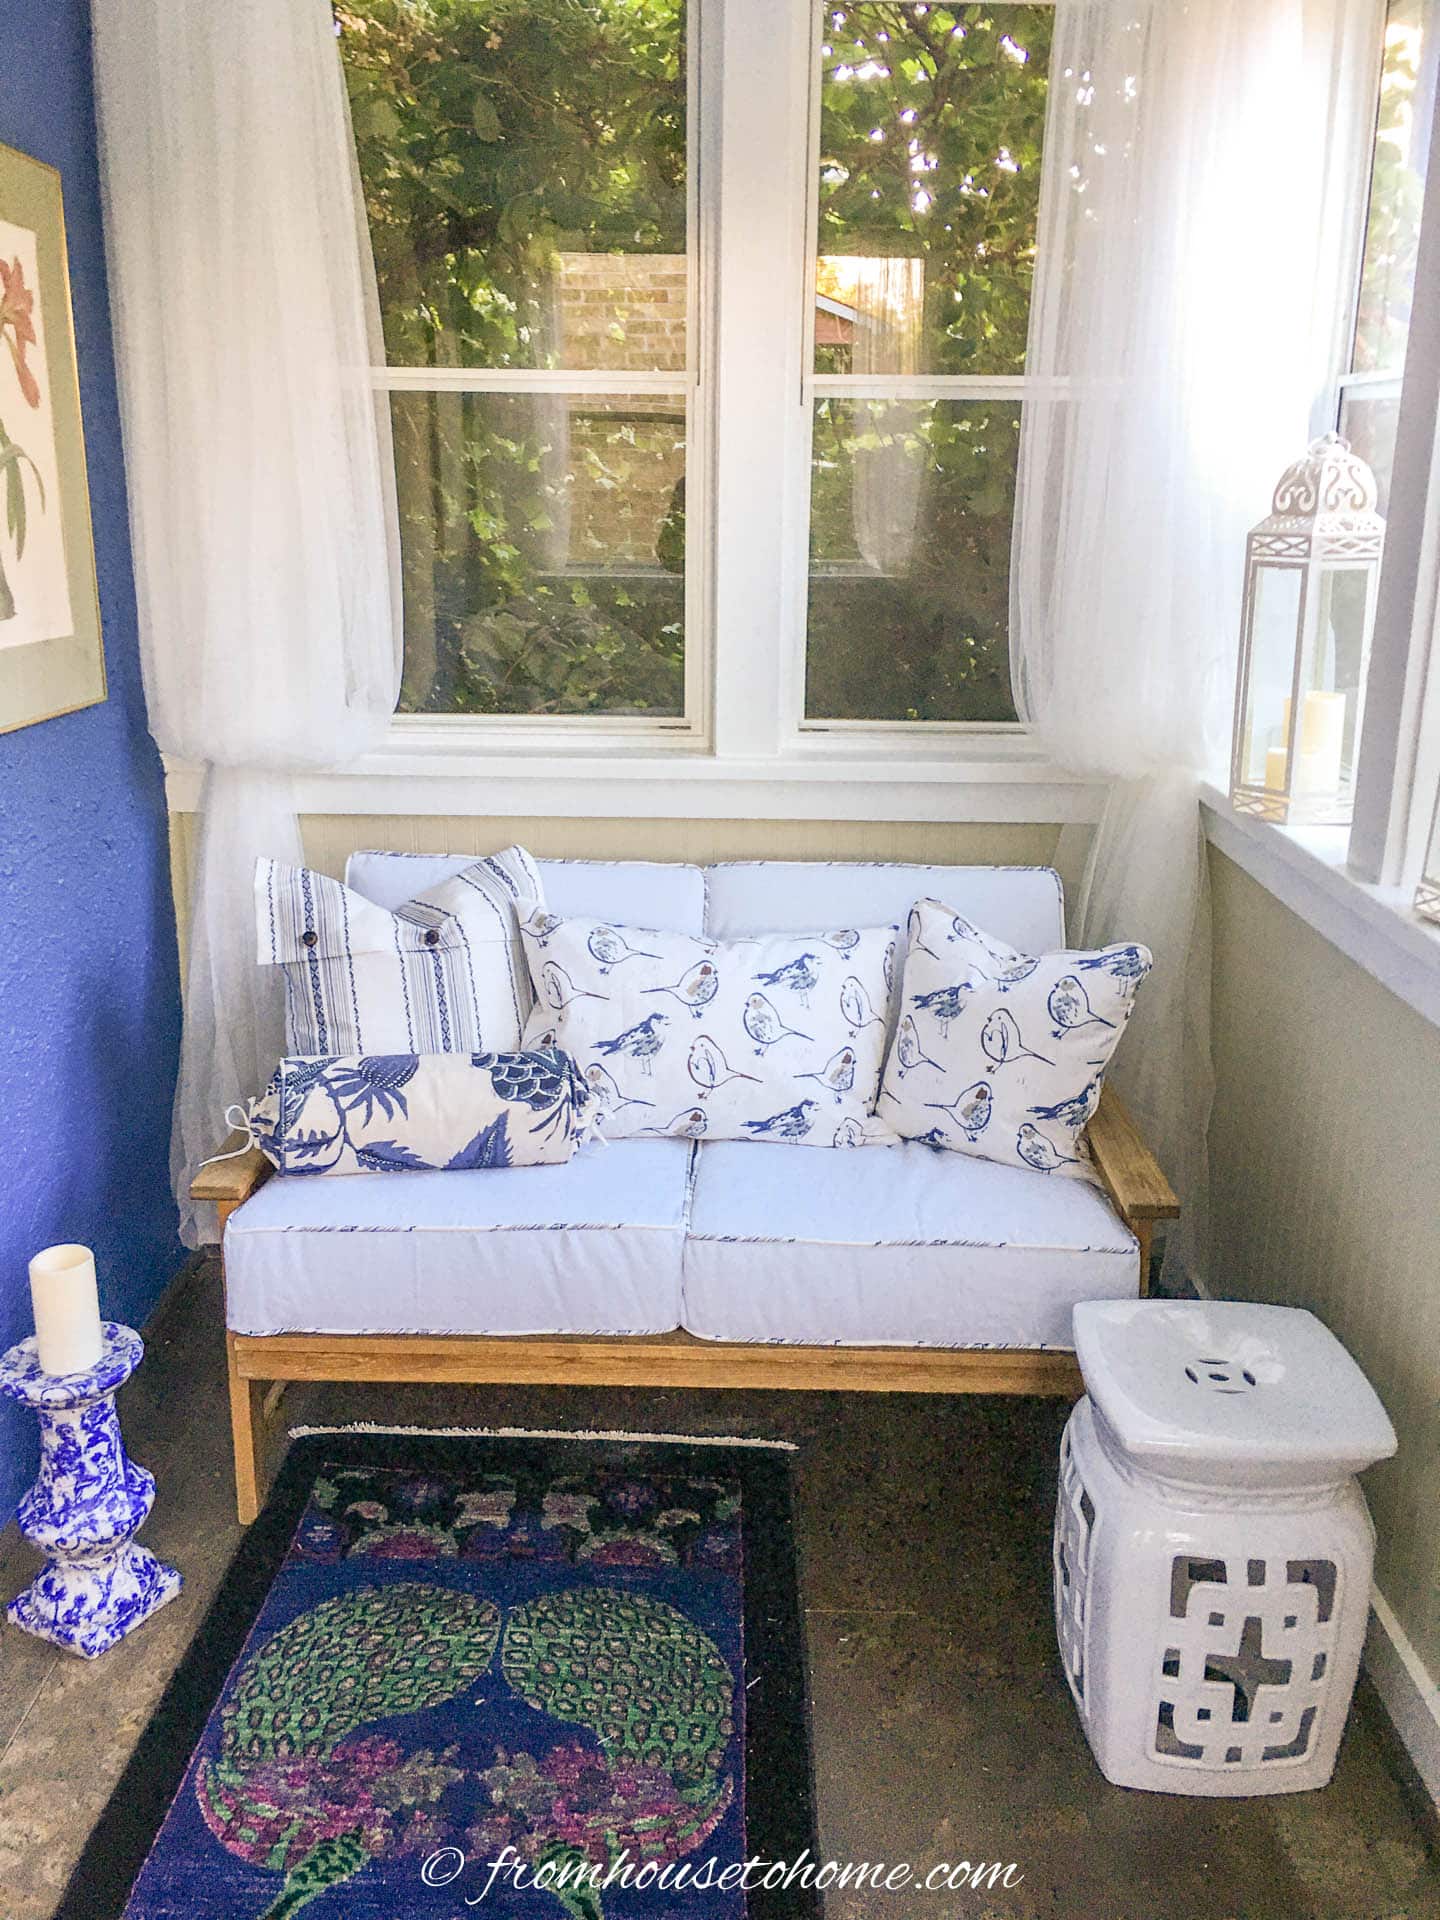 pine loveseat with white box cushions and blue and white throw pillows in a front porch